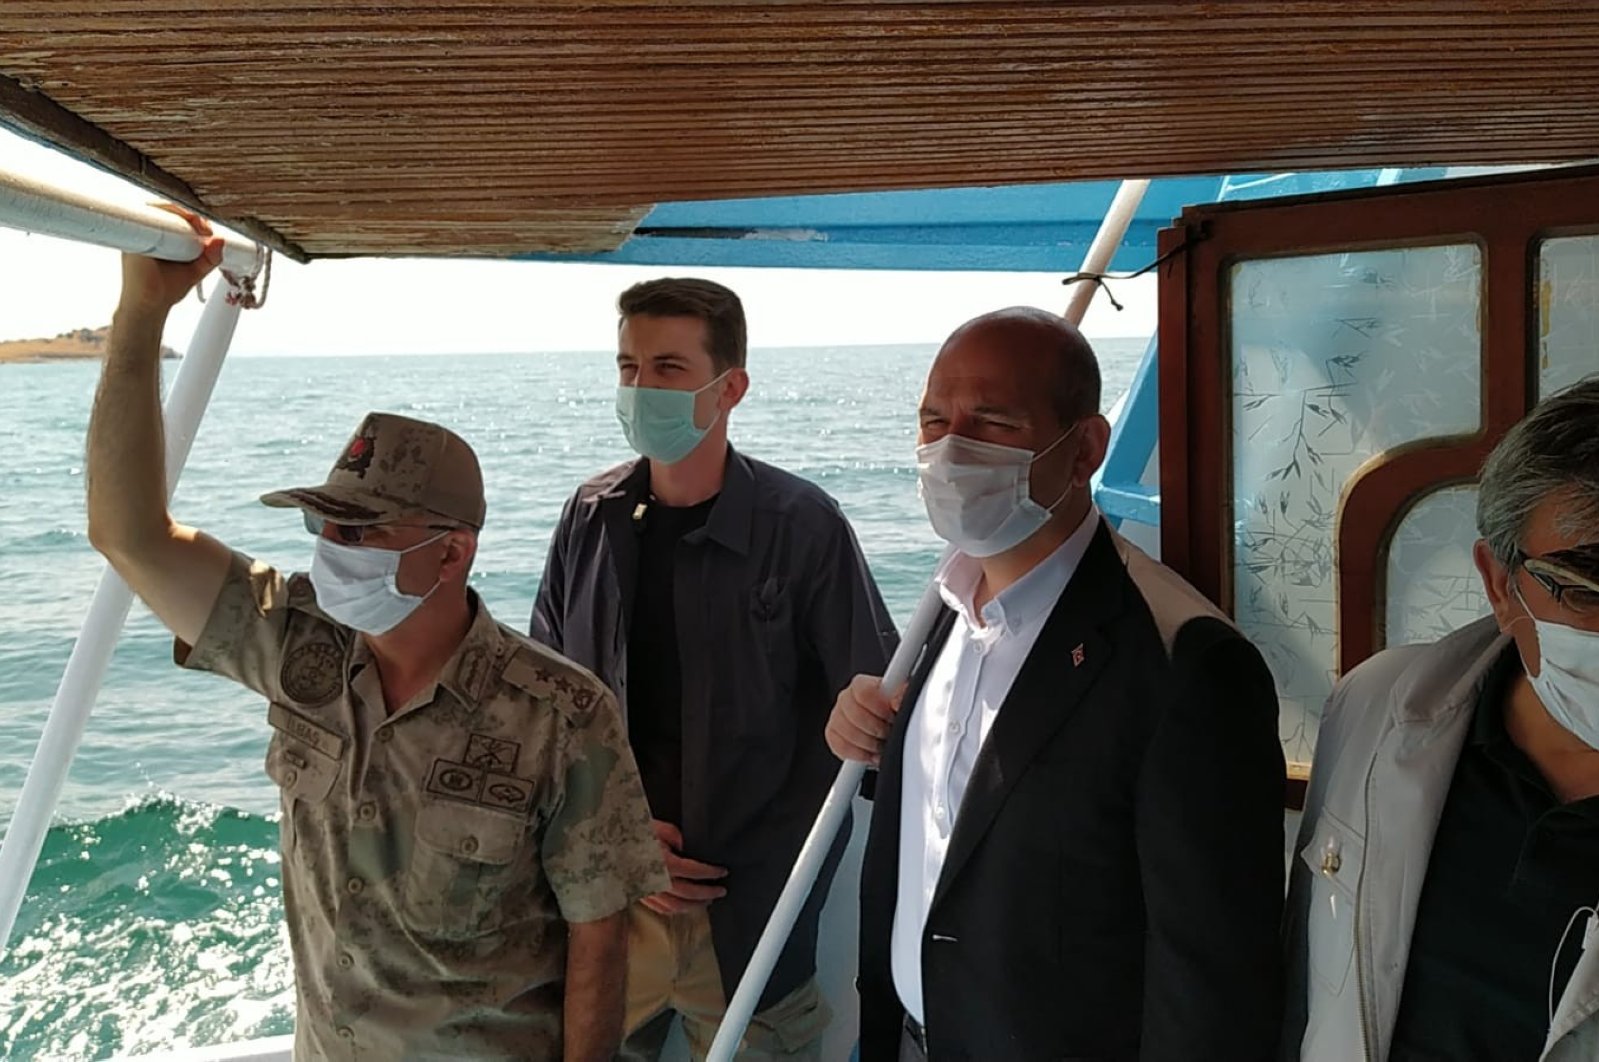 Interior Minister Süleyman Soylu (R), inspects the rescue work in Lake Van following the sinking of a migrant boat, July 1, 2020. (IHA)